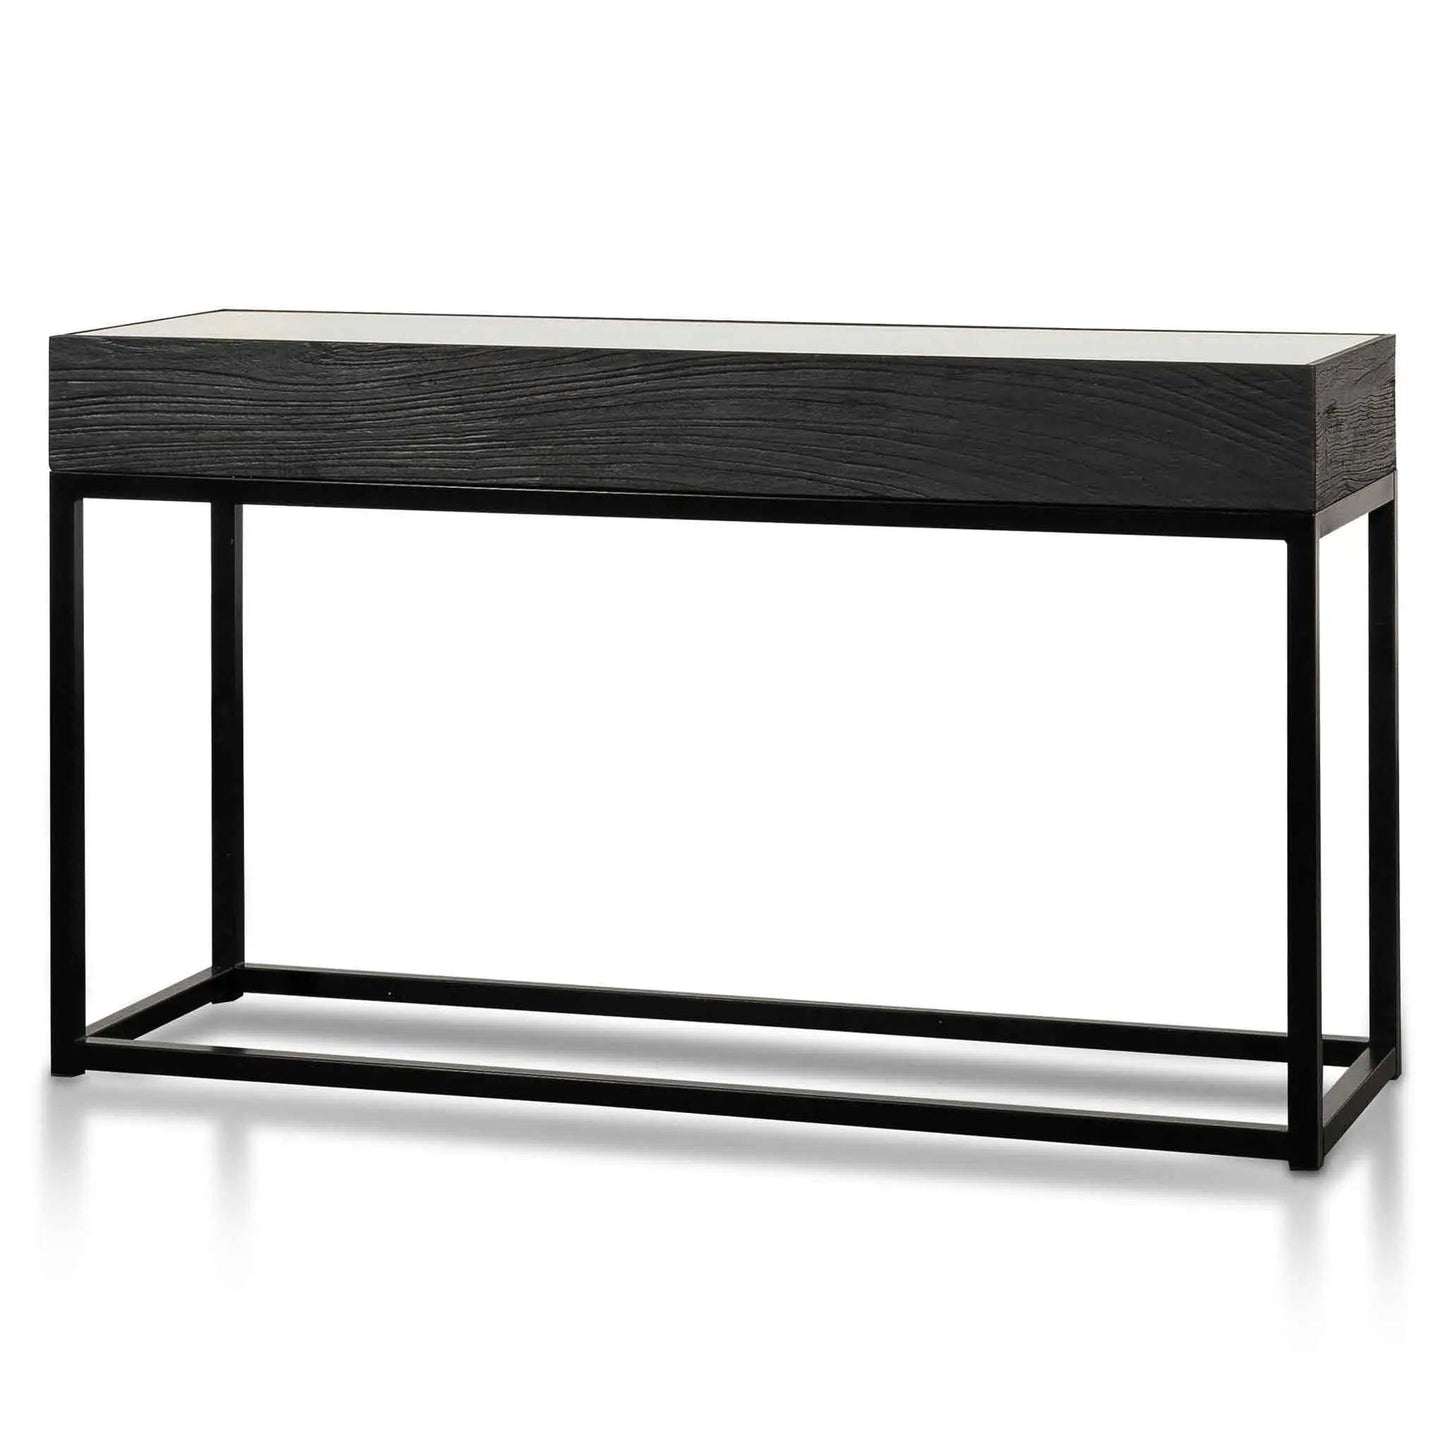 Calibre 1.39m Reclaimed Console Table - Full Black DT6307-NI - Console TablesDT6307-NI 2